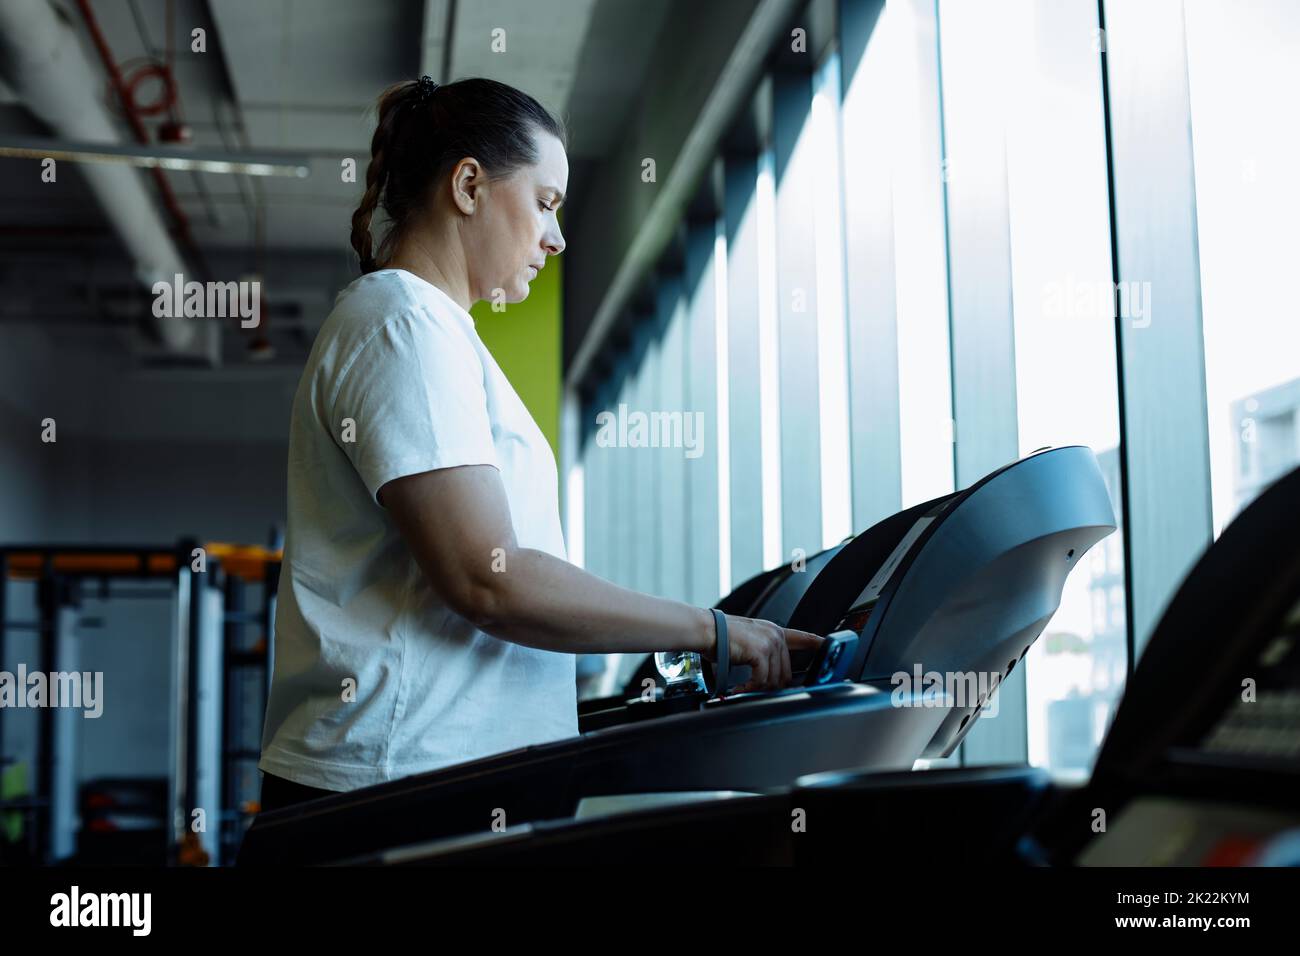 Adult plus size woman run on treadmill at fitness gym, side view. Middle aged lady set up speed mode on sport equipment for cardio workout. Weight Stock Photo